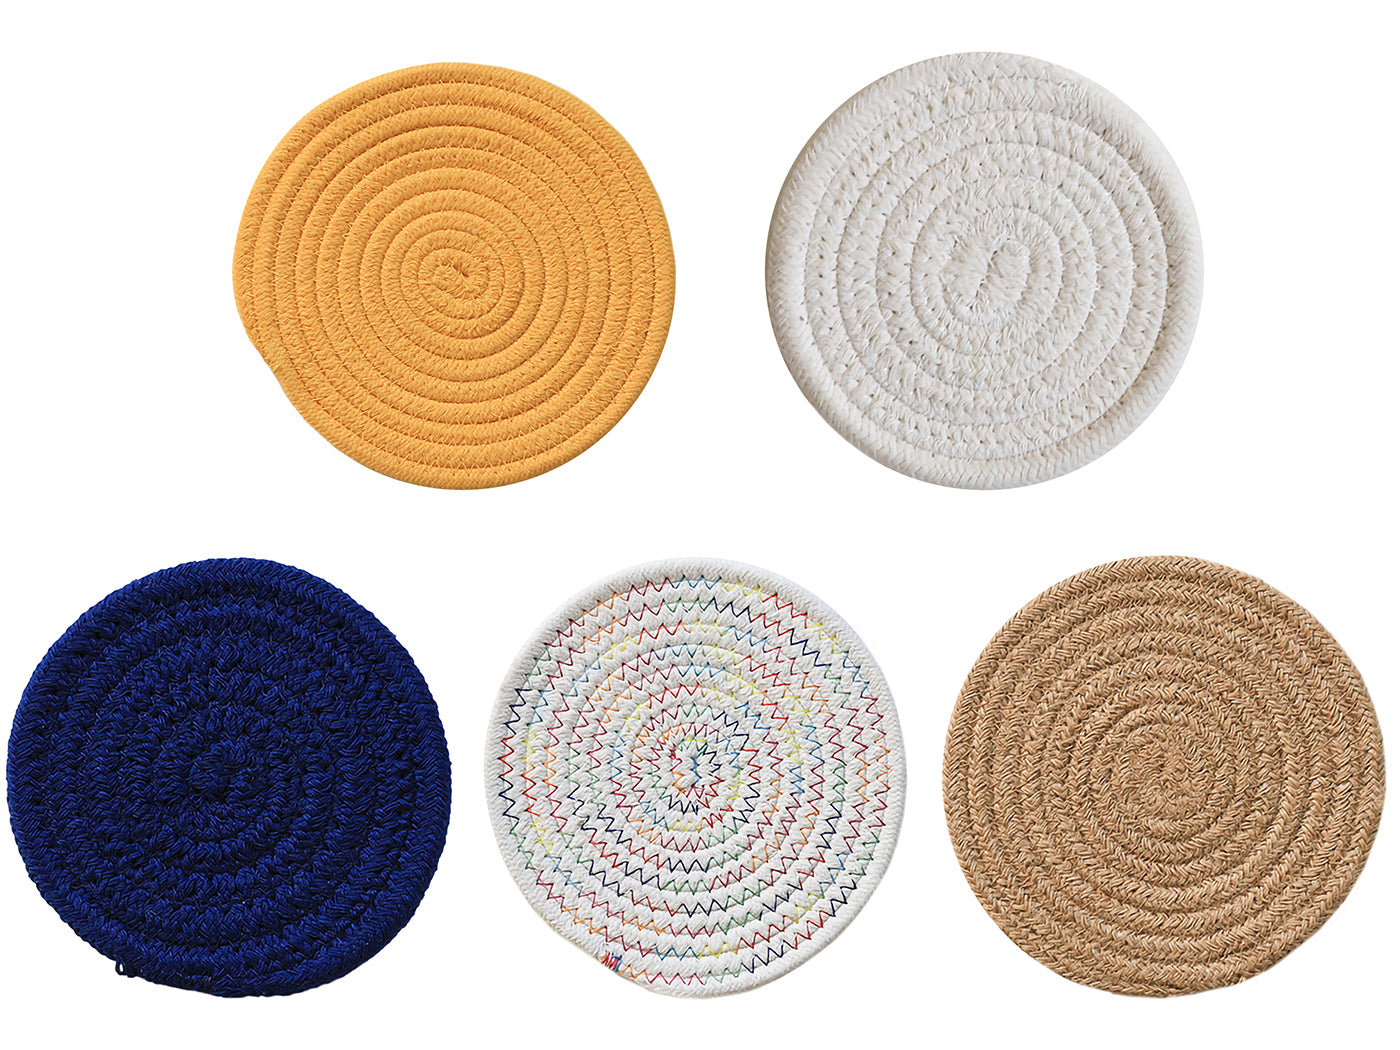 Cotton Woven Braided Round Coasters Set of 5